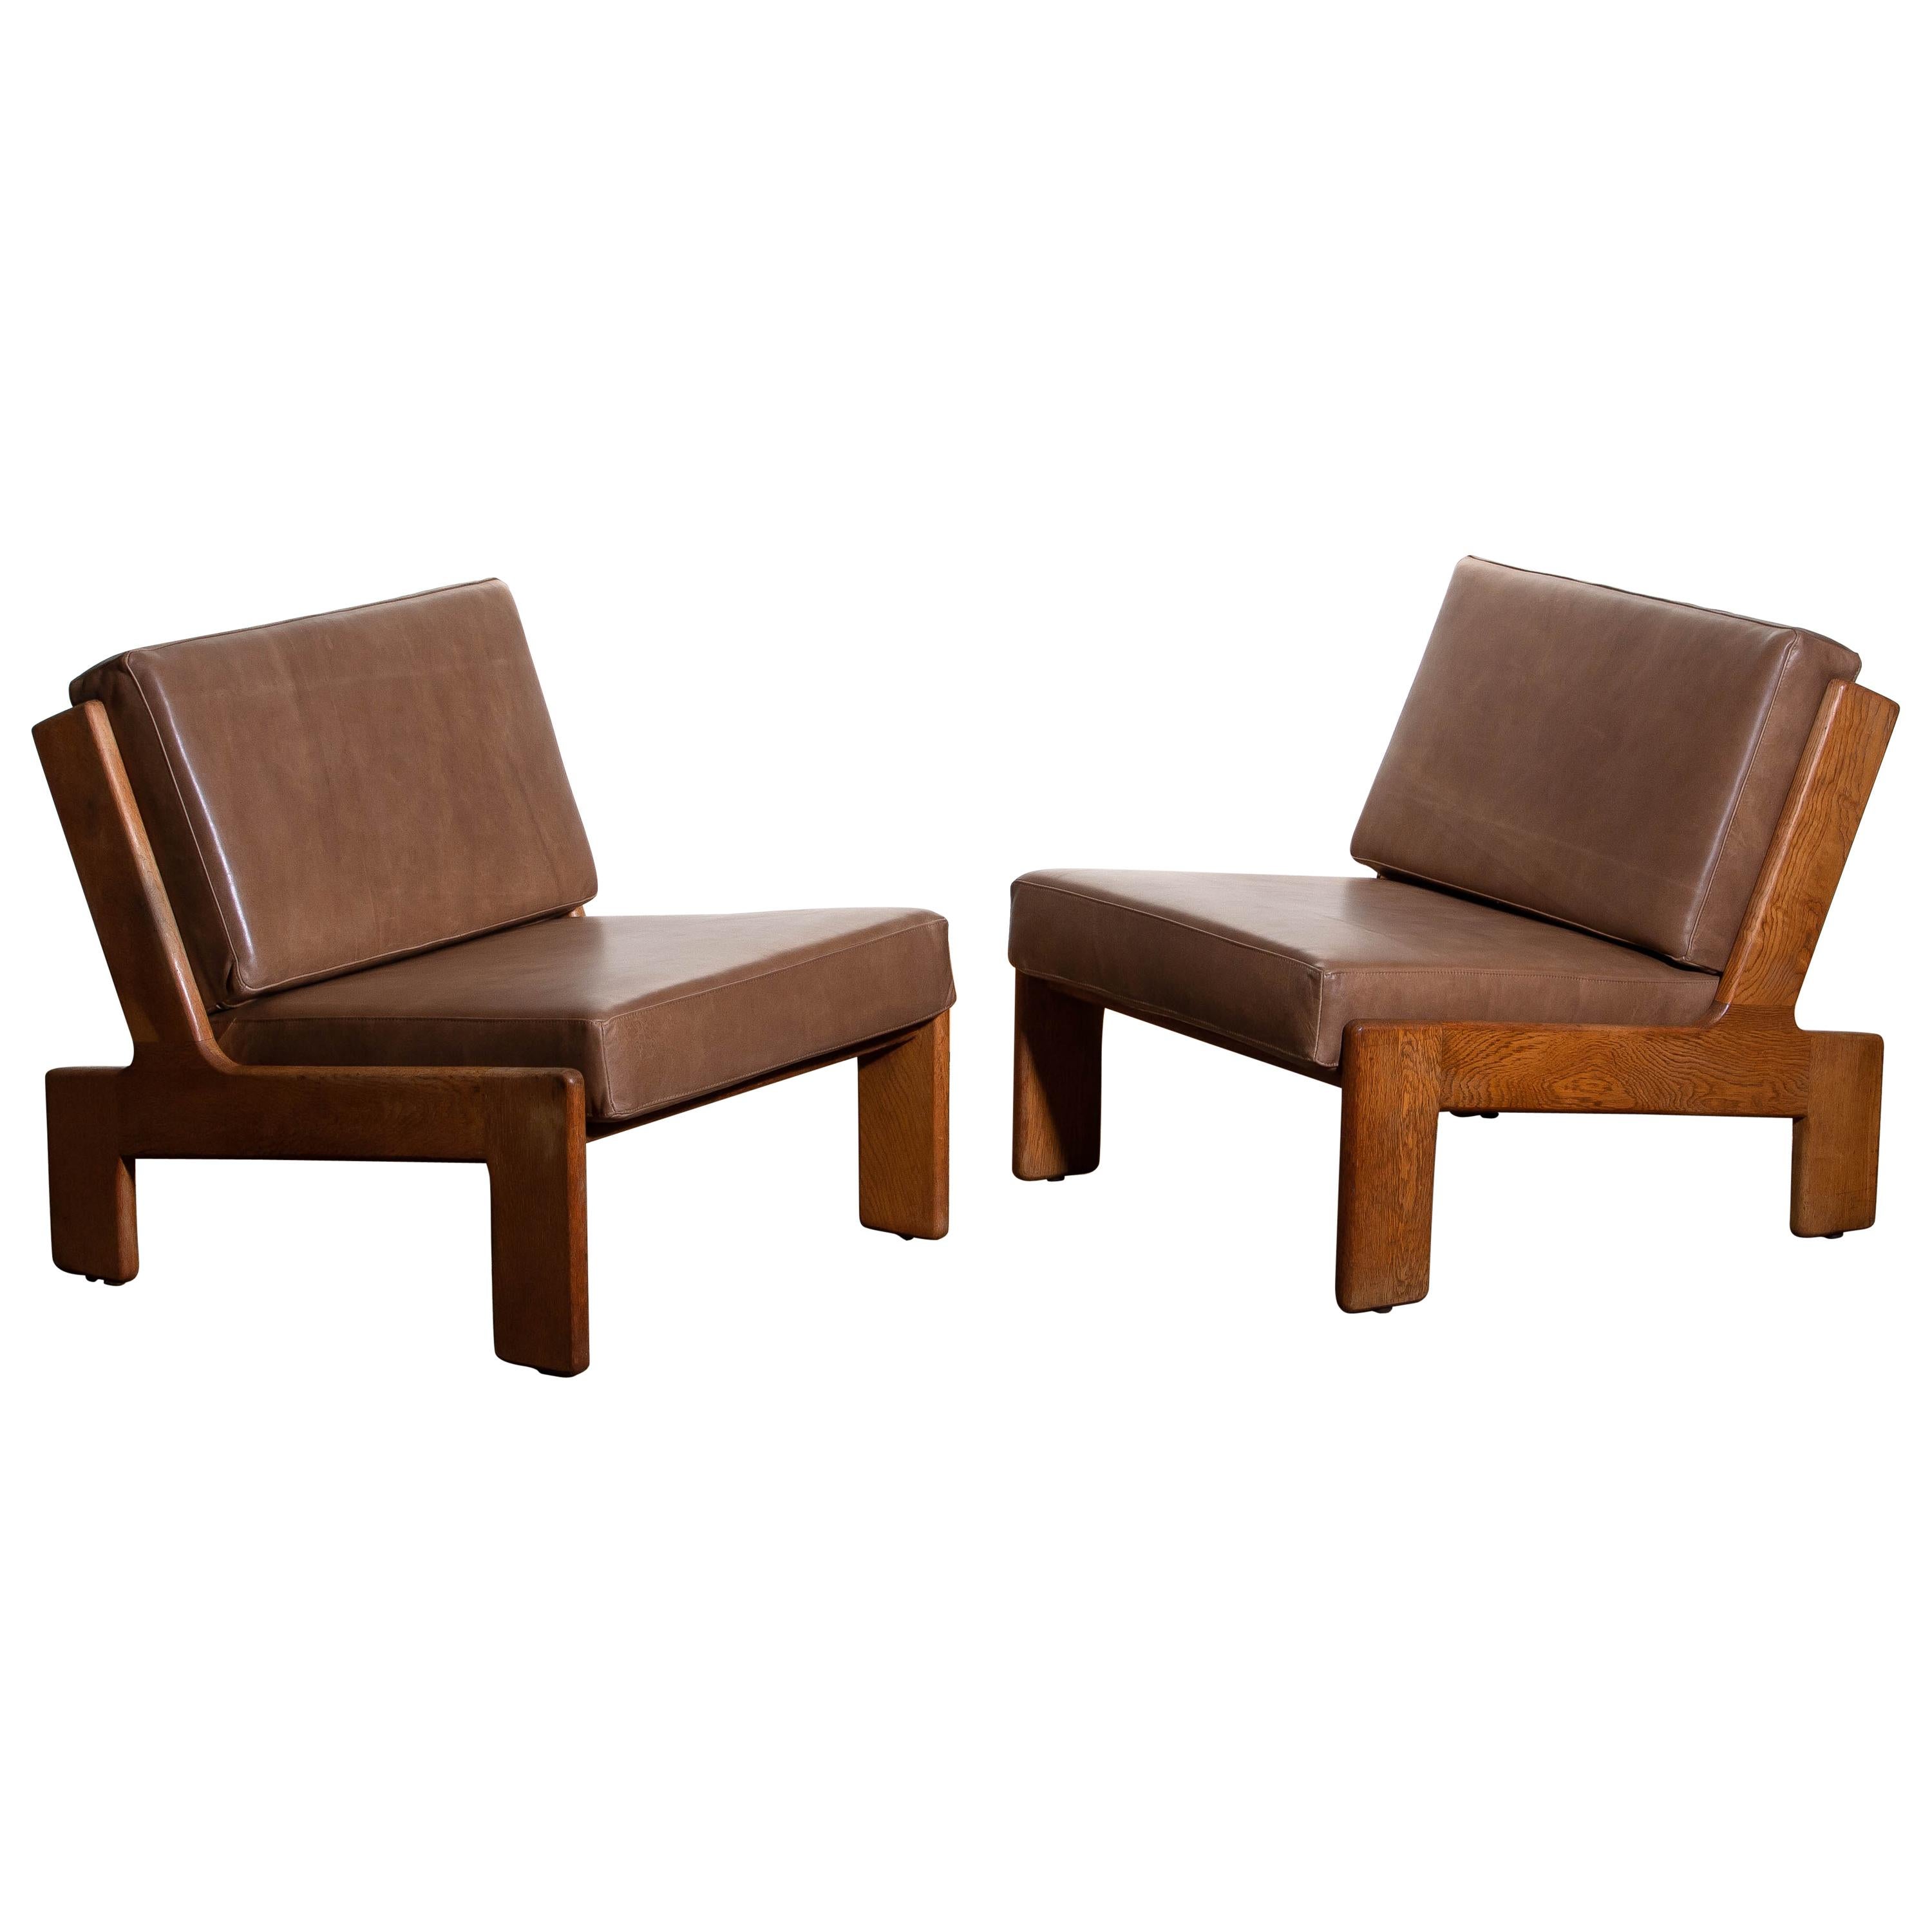 1960, Pair of Oak and Leather Cubist Lounge Chairs by Esko Pajamies for Asko 1